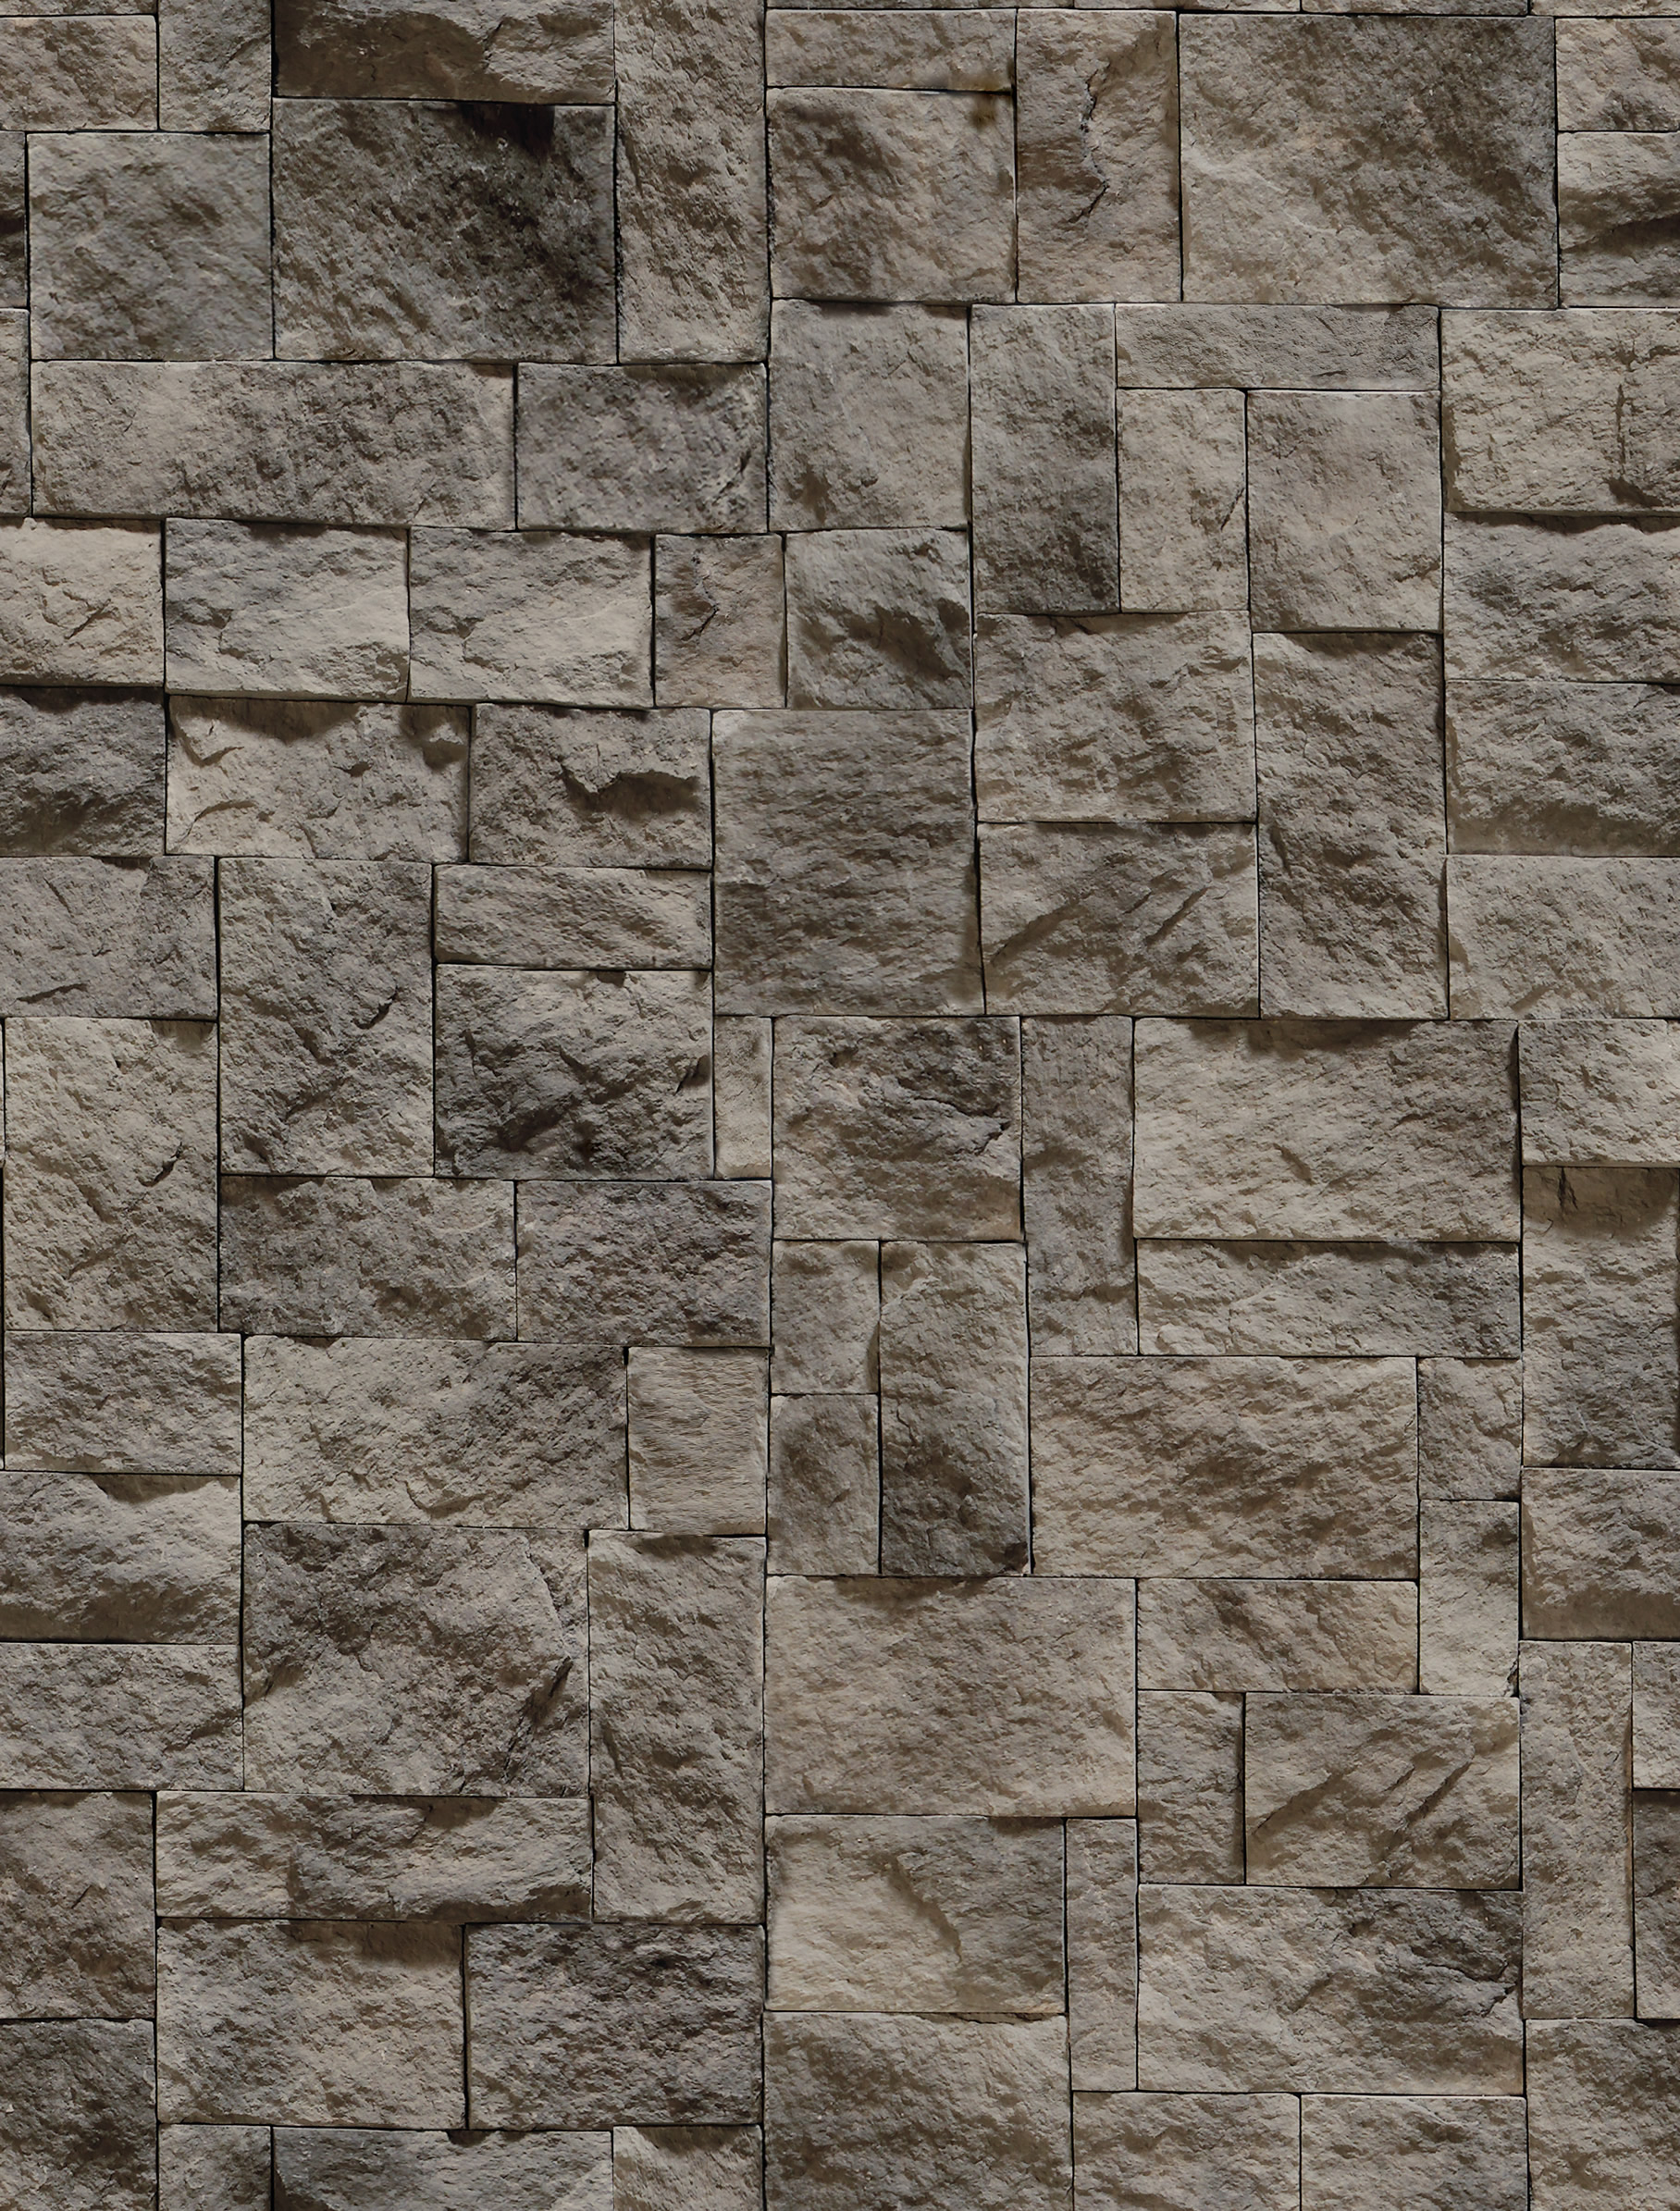  stone, download photo, texture, wall